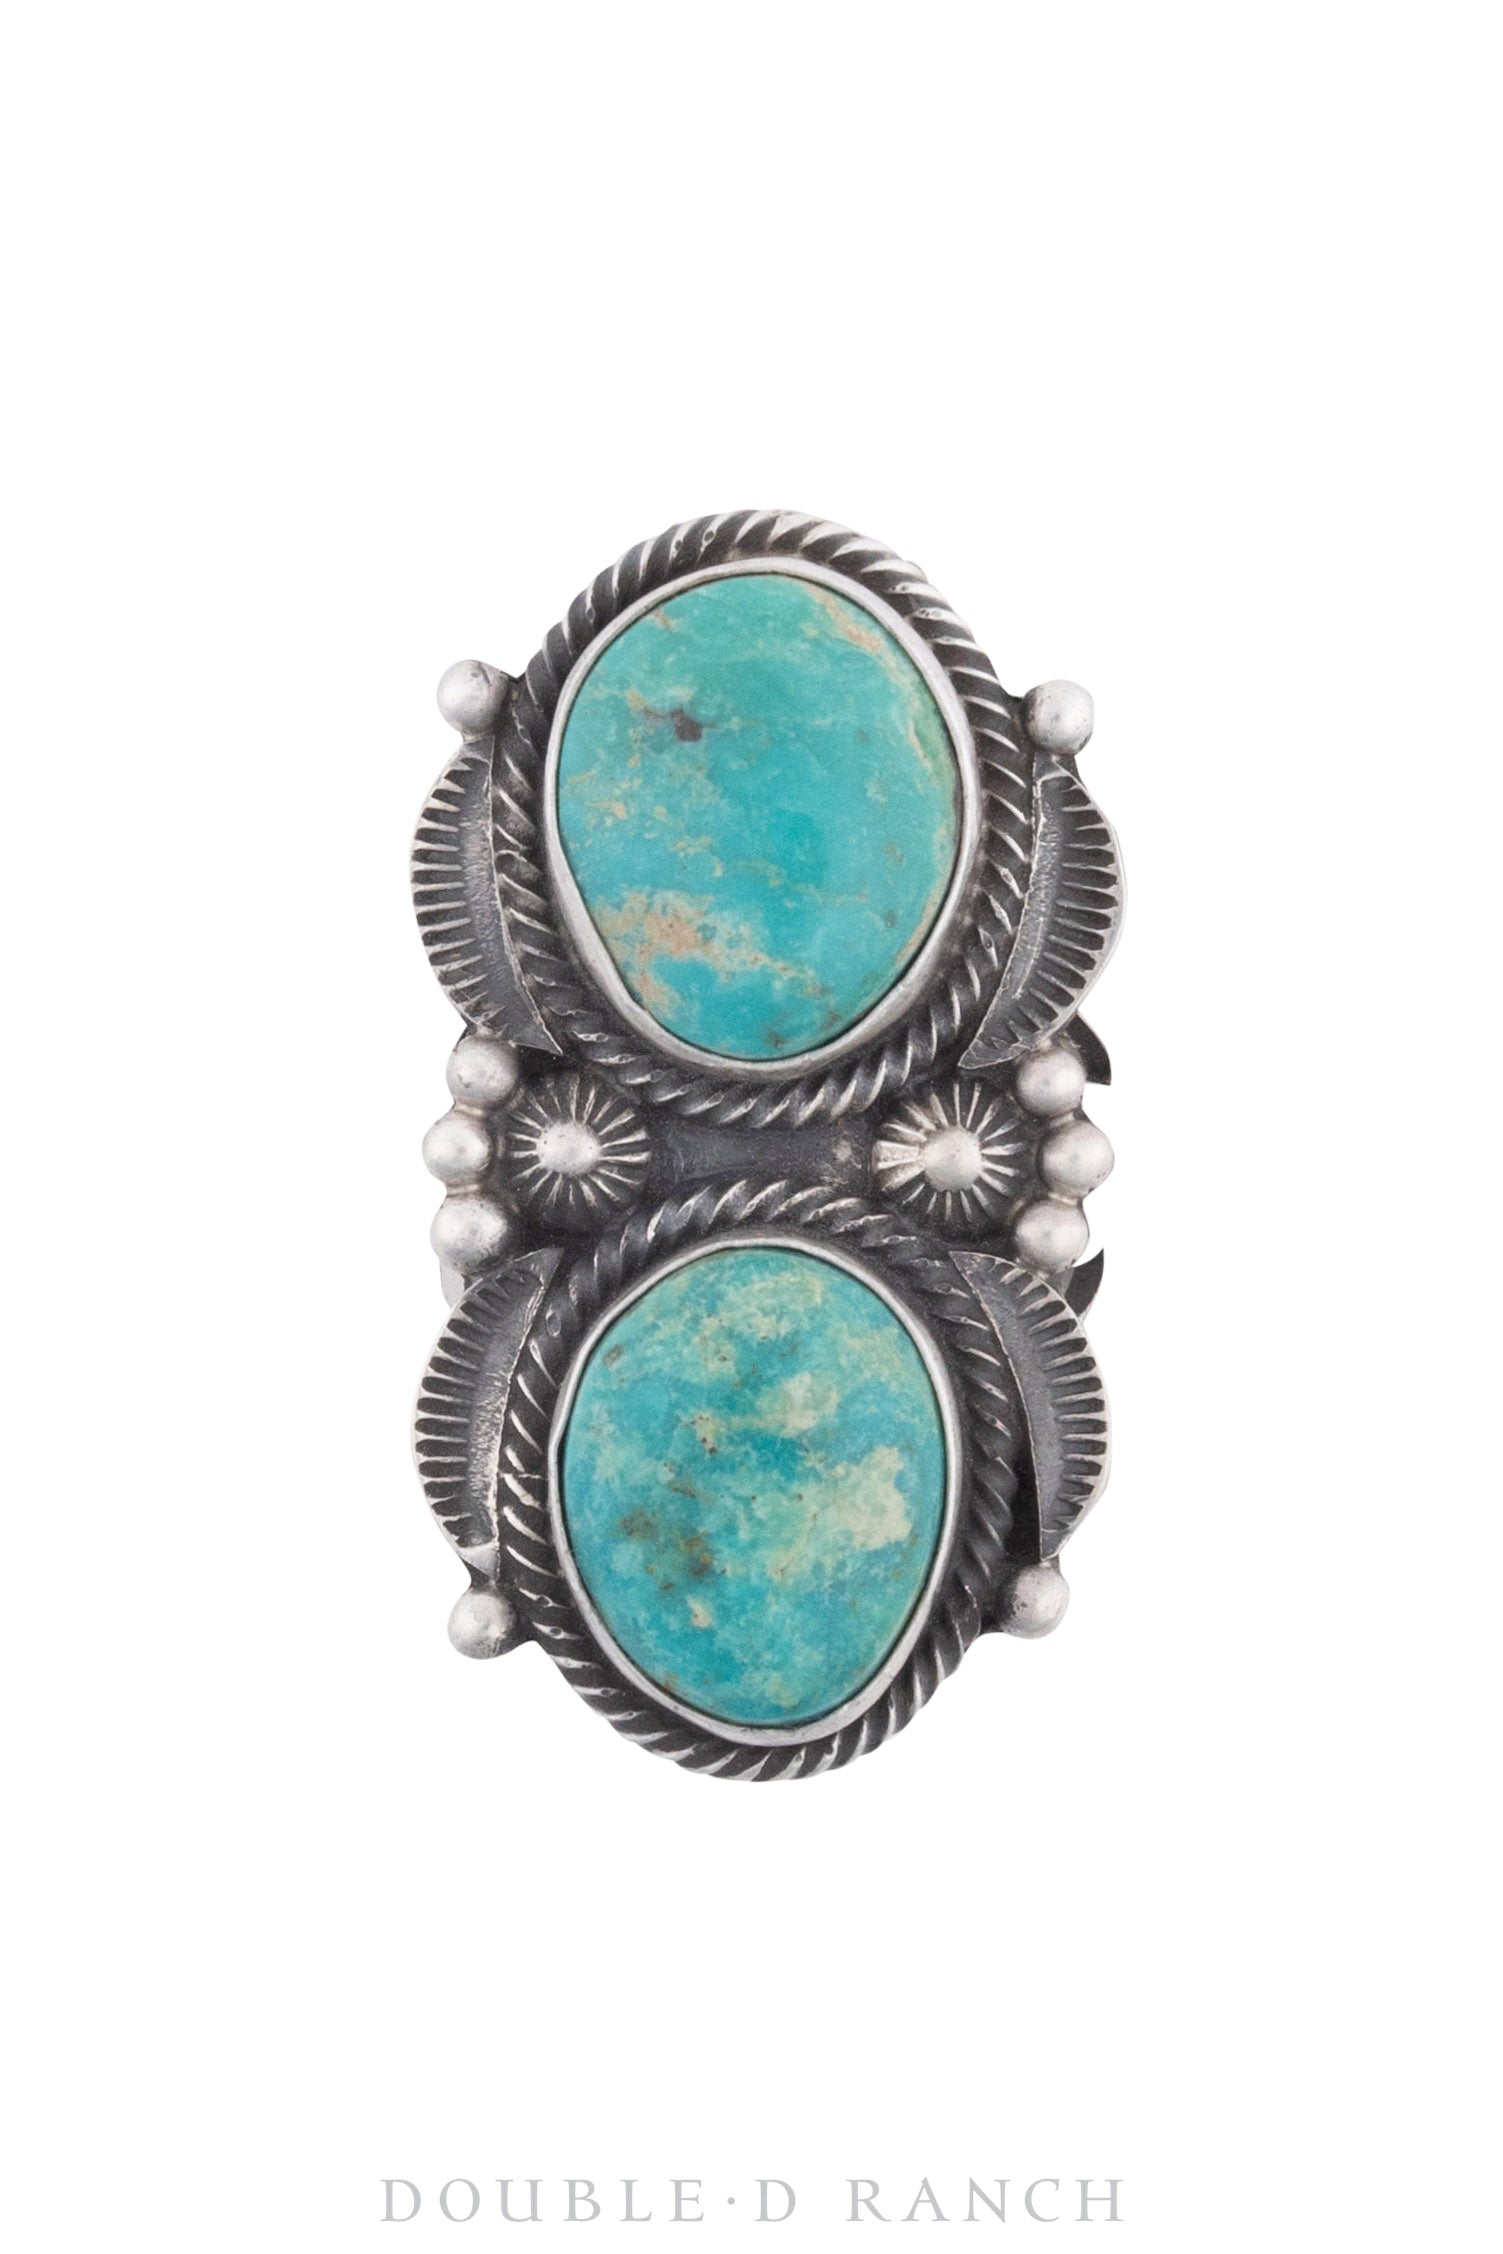 Ring, Natural Stone, Turquoise, Hallmark, Contemporary, 1277